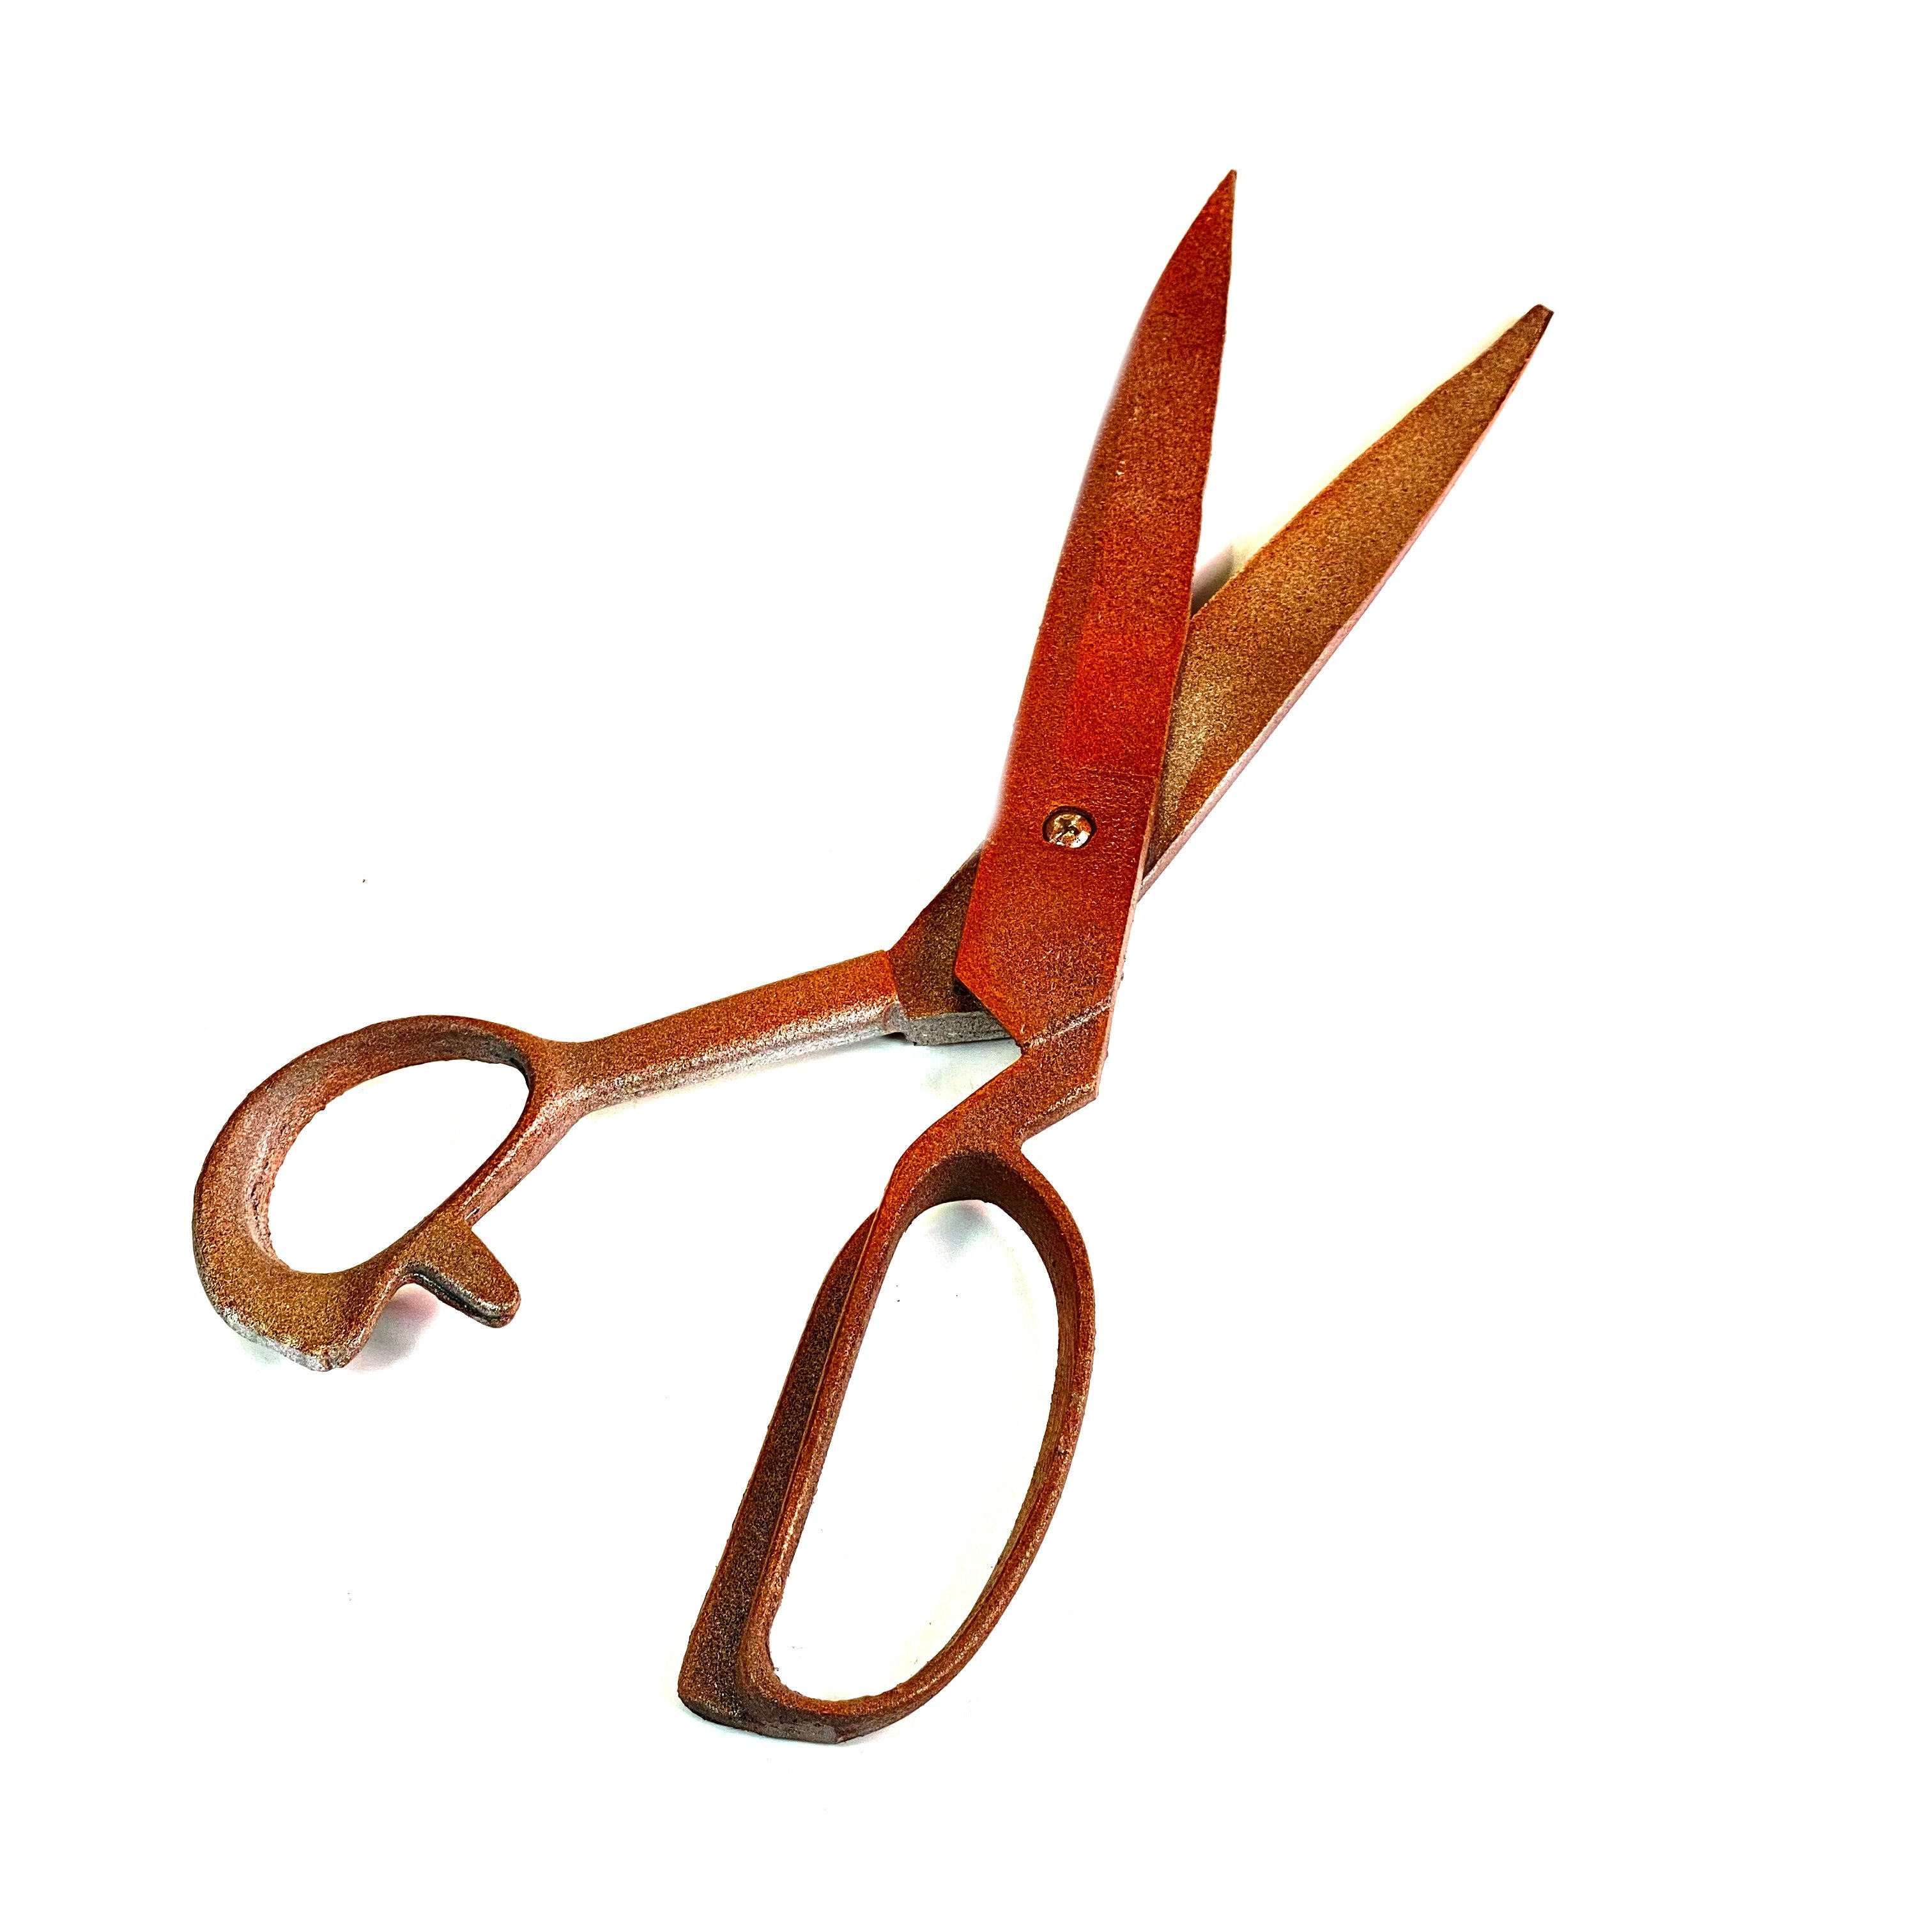 Large Plastic Scissors or Shears with Functional Moving Parts - Rusty - Rusted Chrome